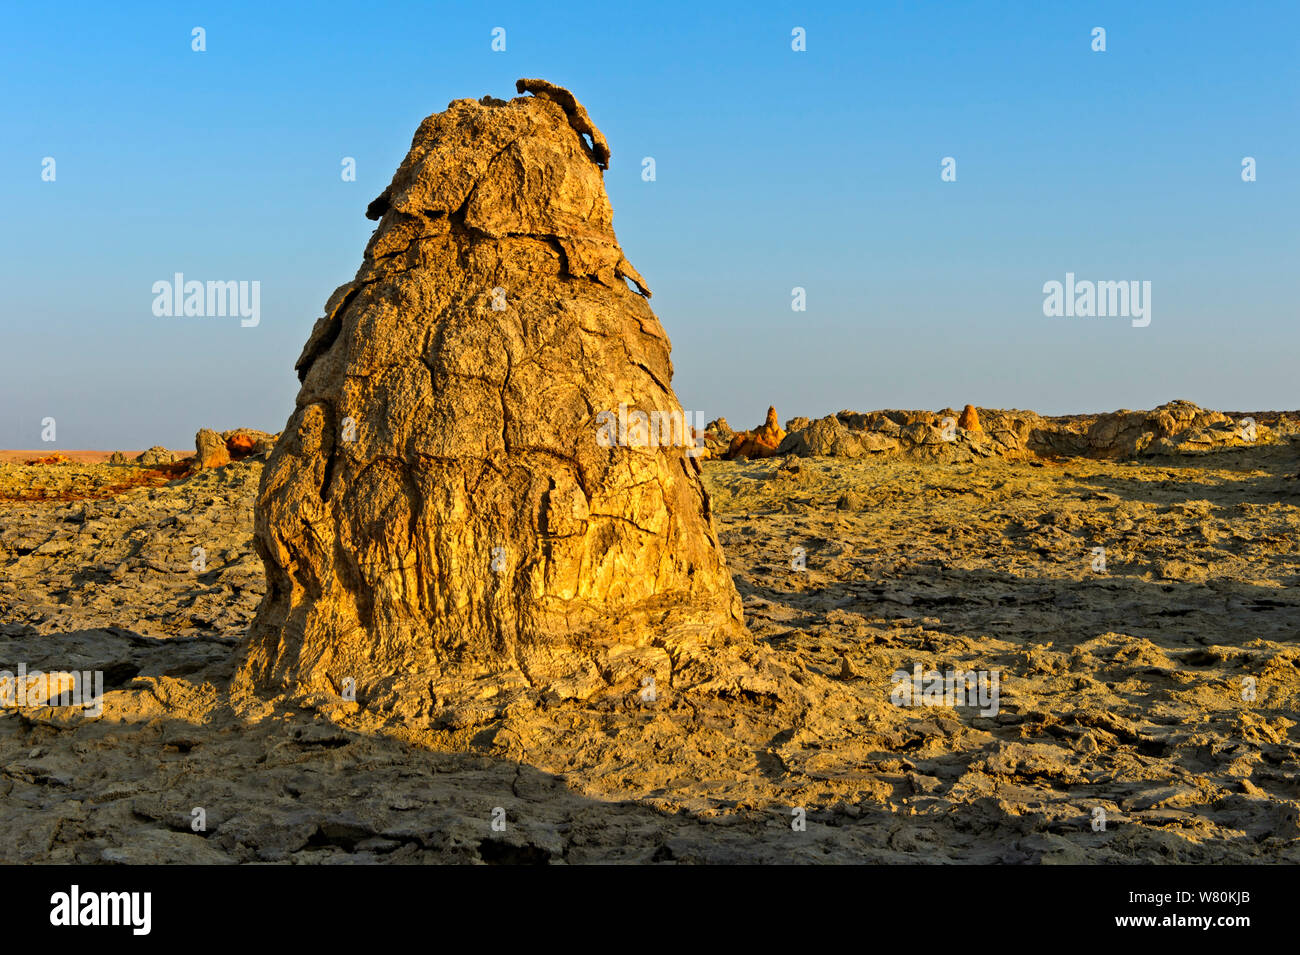 Relic geothermal mounds, geothermal field of Dallol, Danakil depression, Afar Triangle, Ethiopia Stock Photo